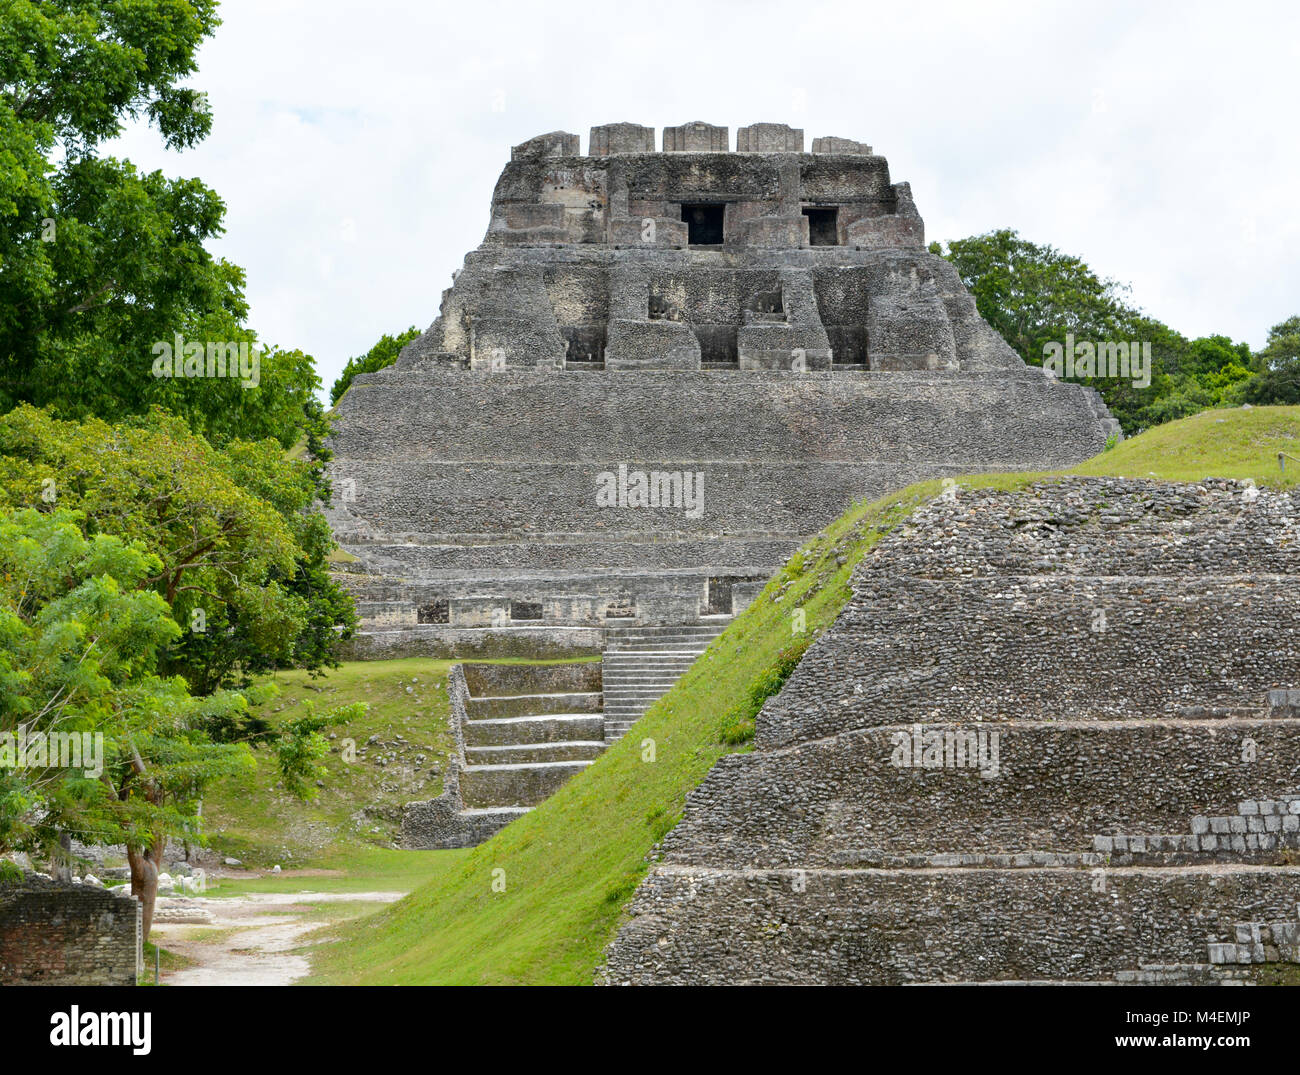 The ancient Mayan ruins at xunantunich archaeological reserve in Belize Stock Photo